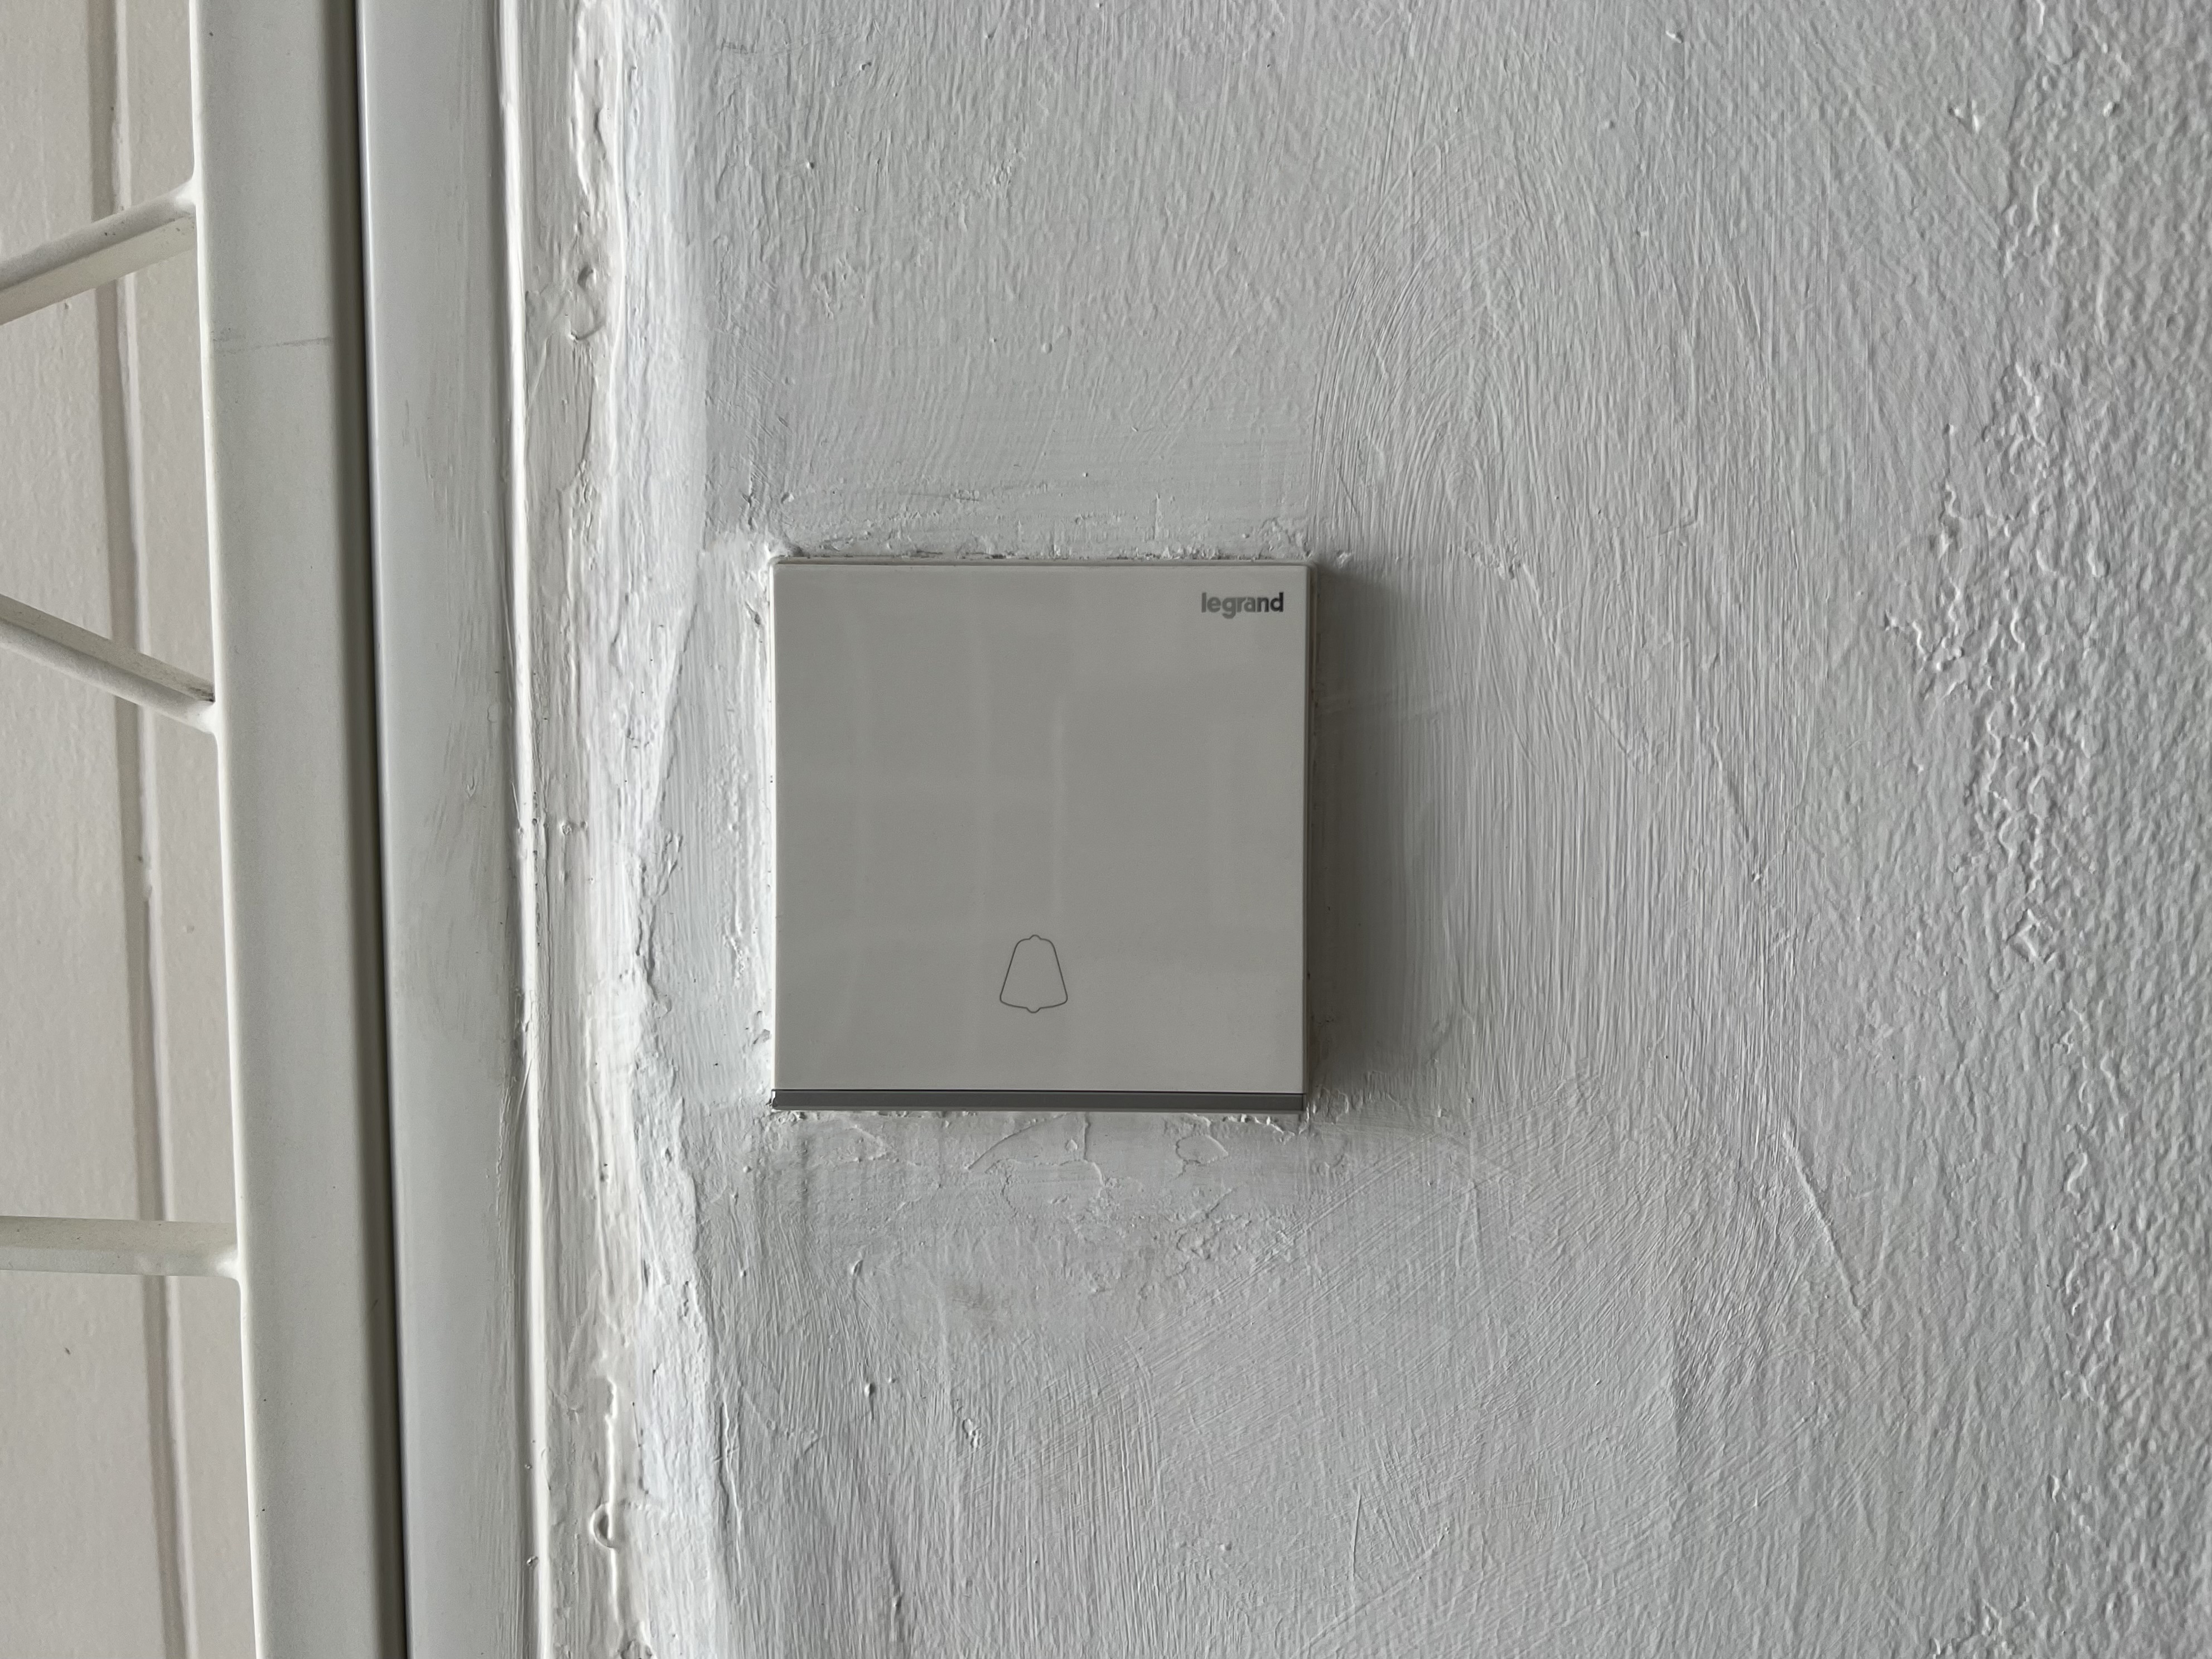 A stylish doorbell switch that is available with our upgraded package